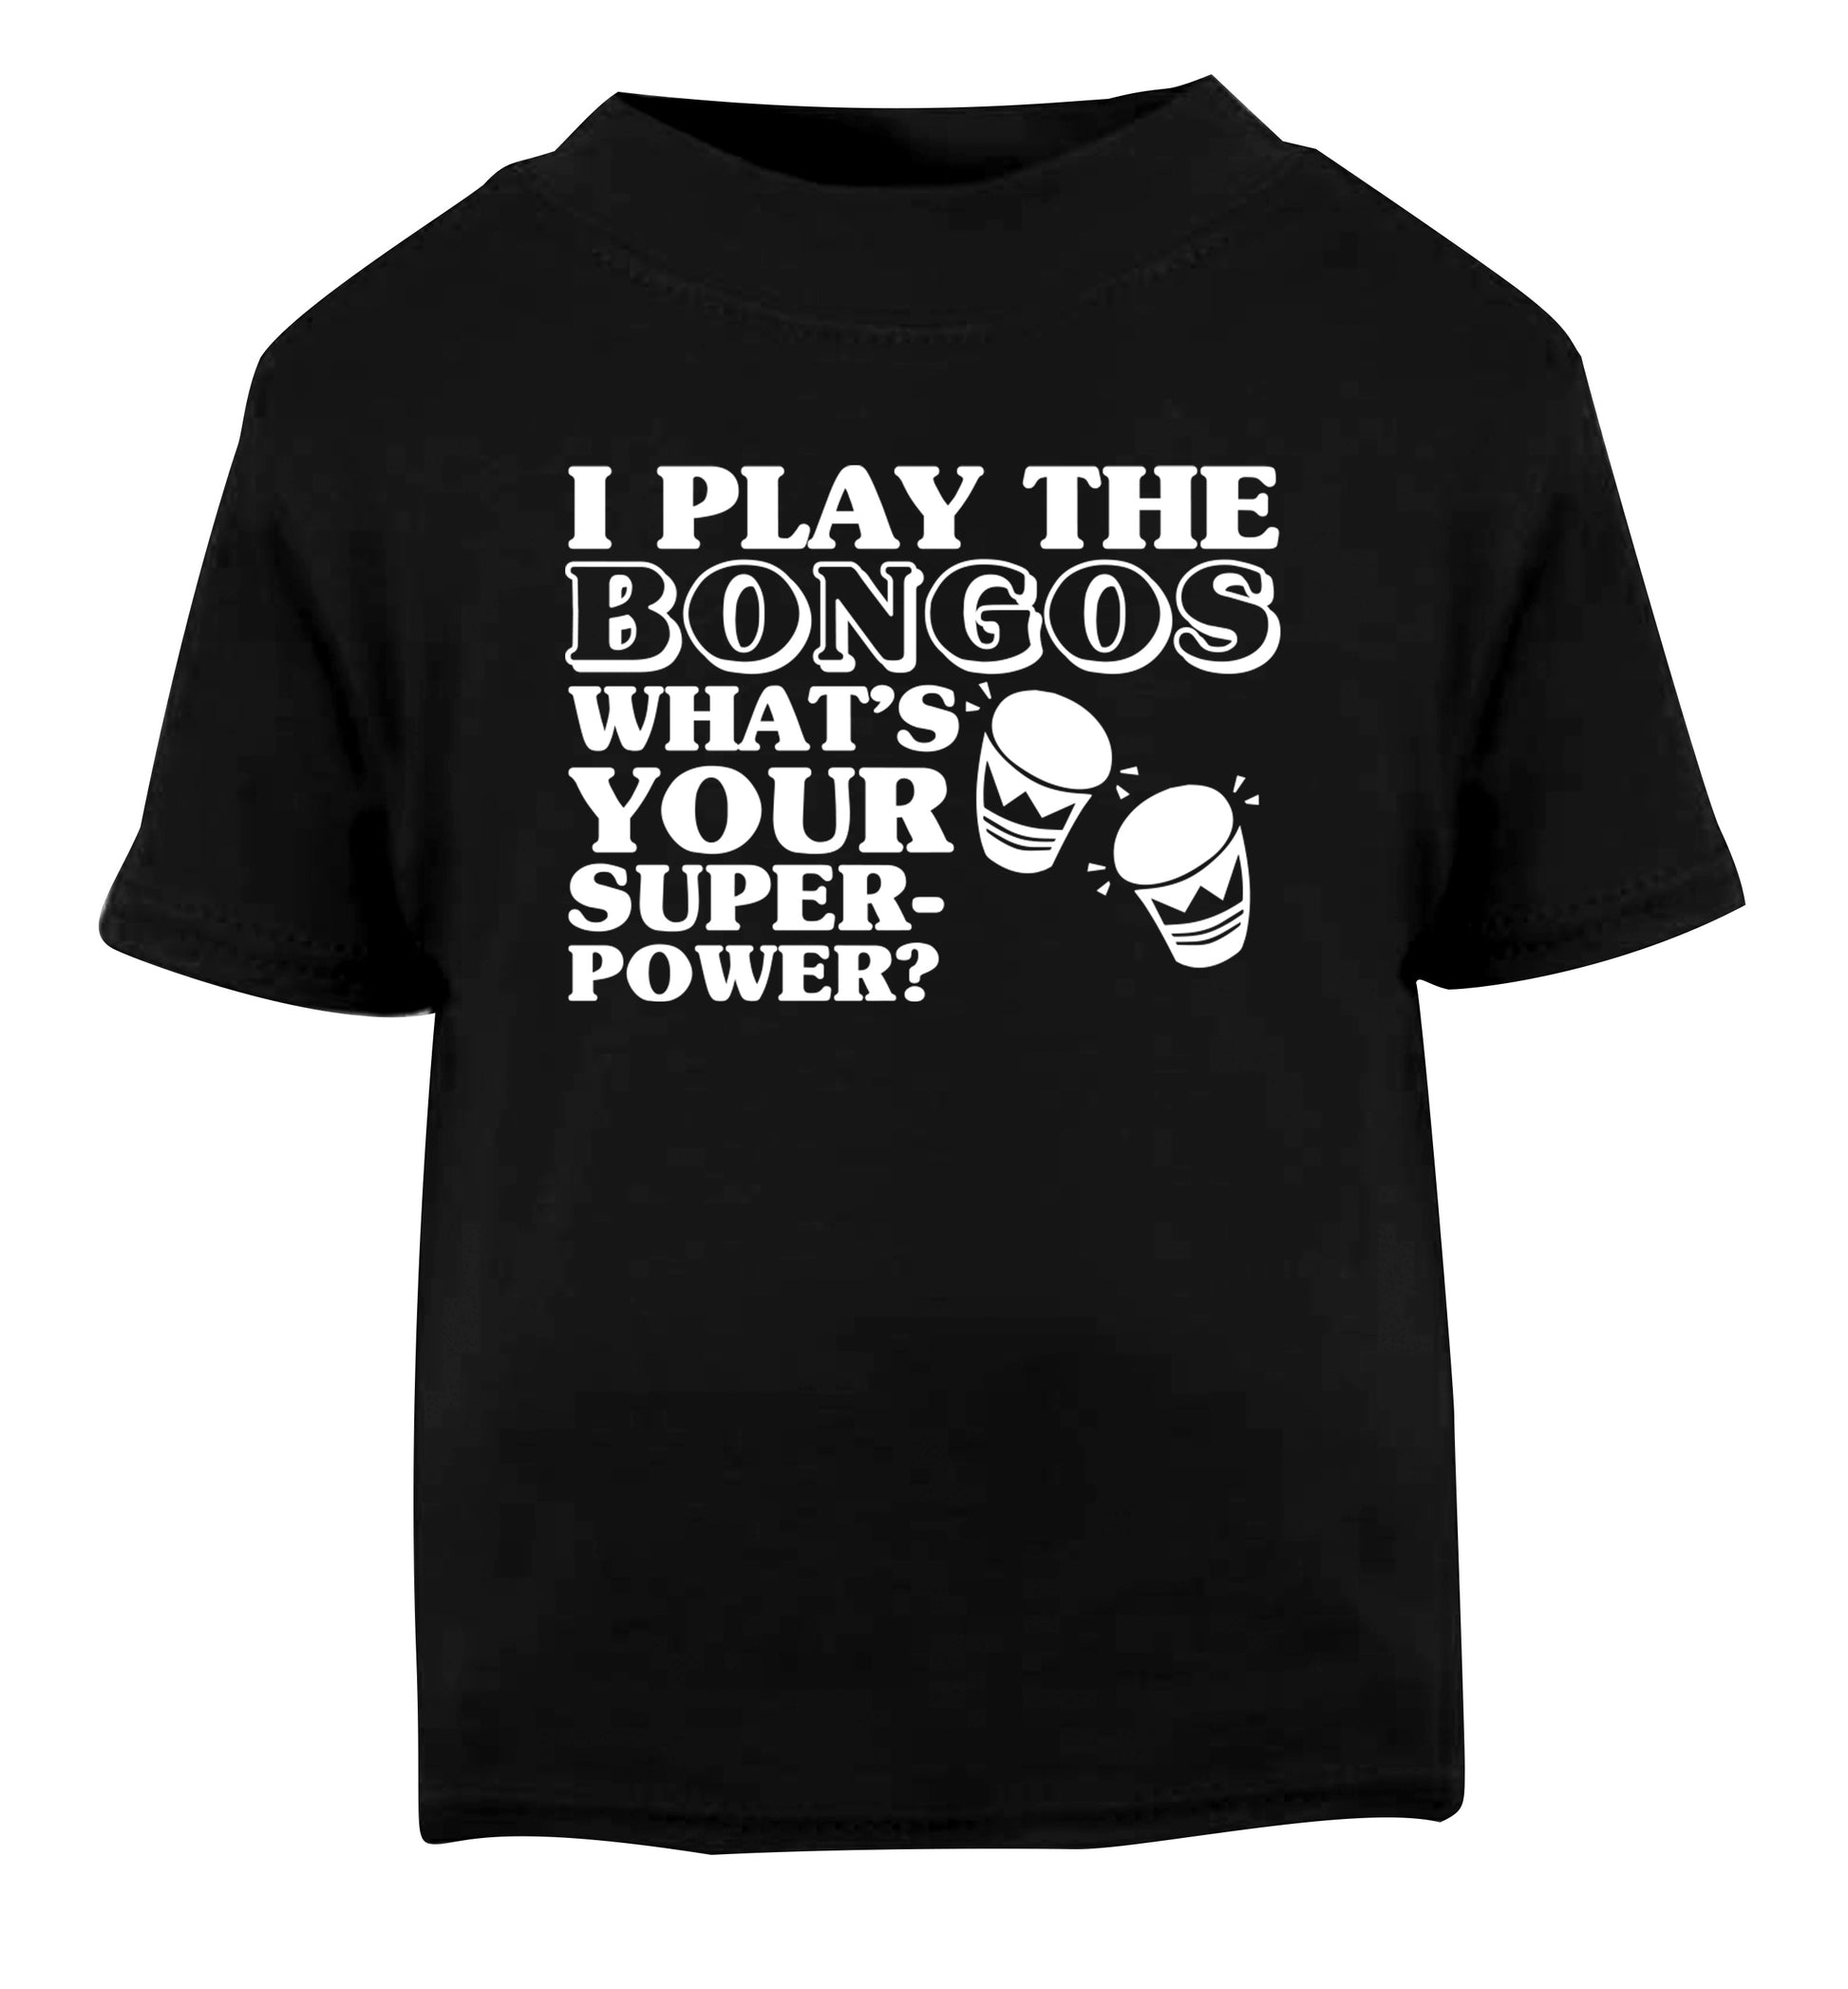 I play the bongos what's your superpower? Black Baby Toddler Tshirt 2 years